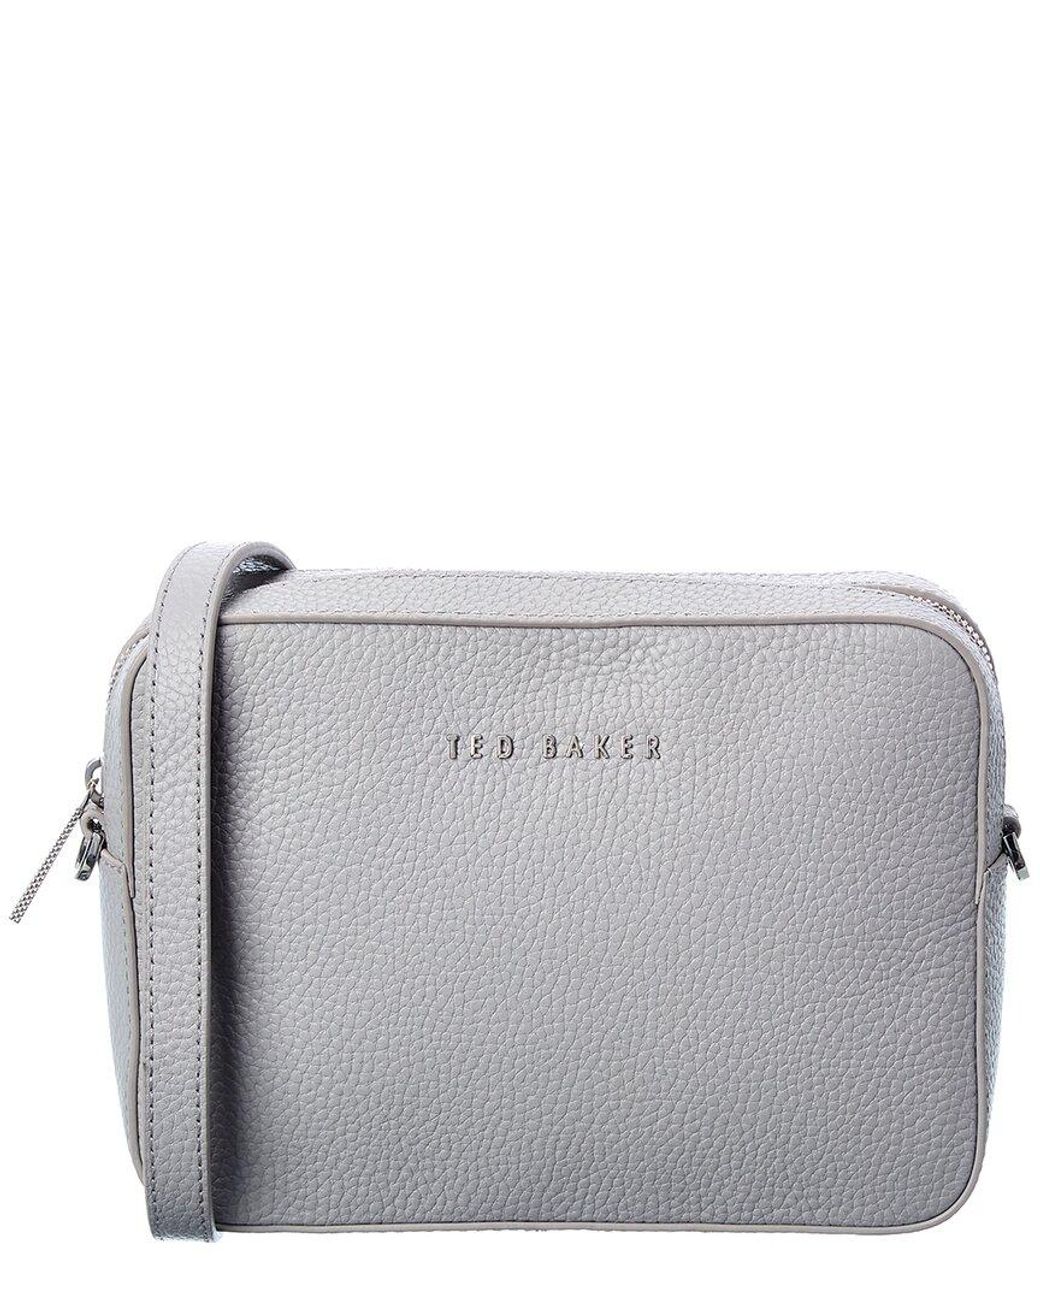 Ted Baker Saphire Soft Leather Camera Bag in Gray | Lyst